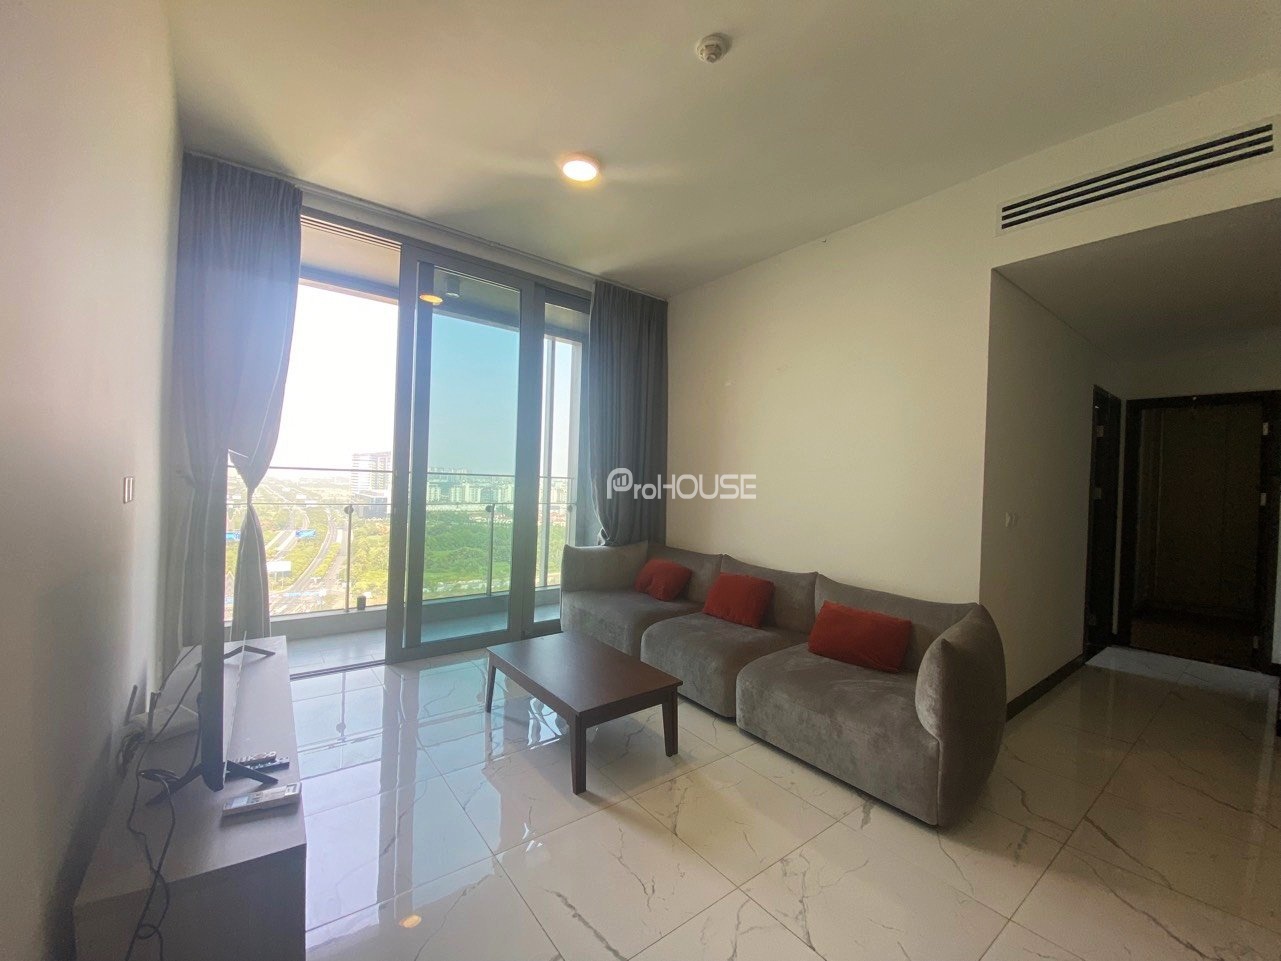 2-bedroom apartment for rent in Empire City with open view and modern furniture